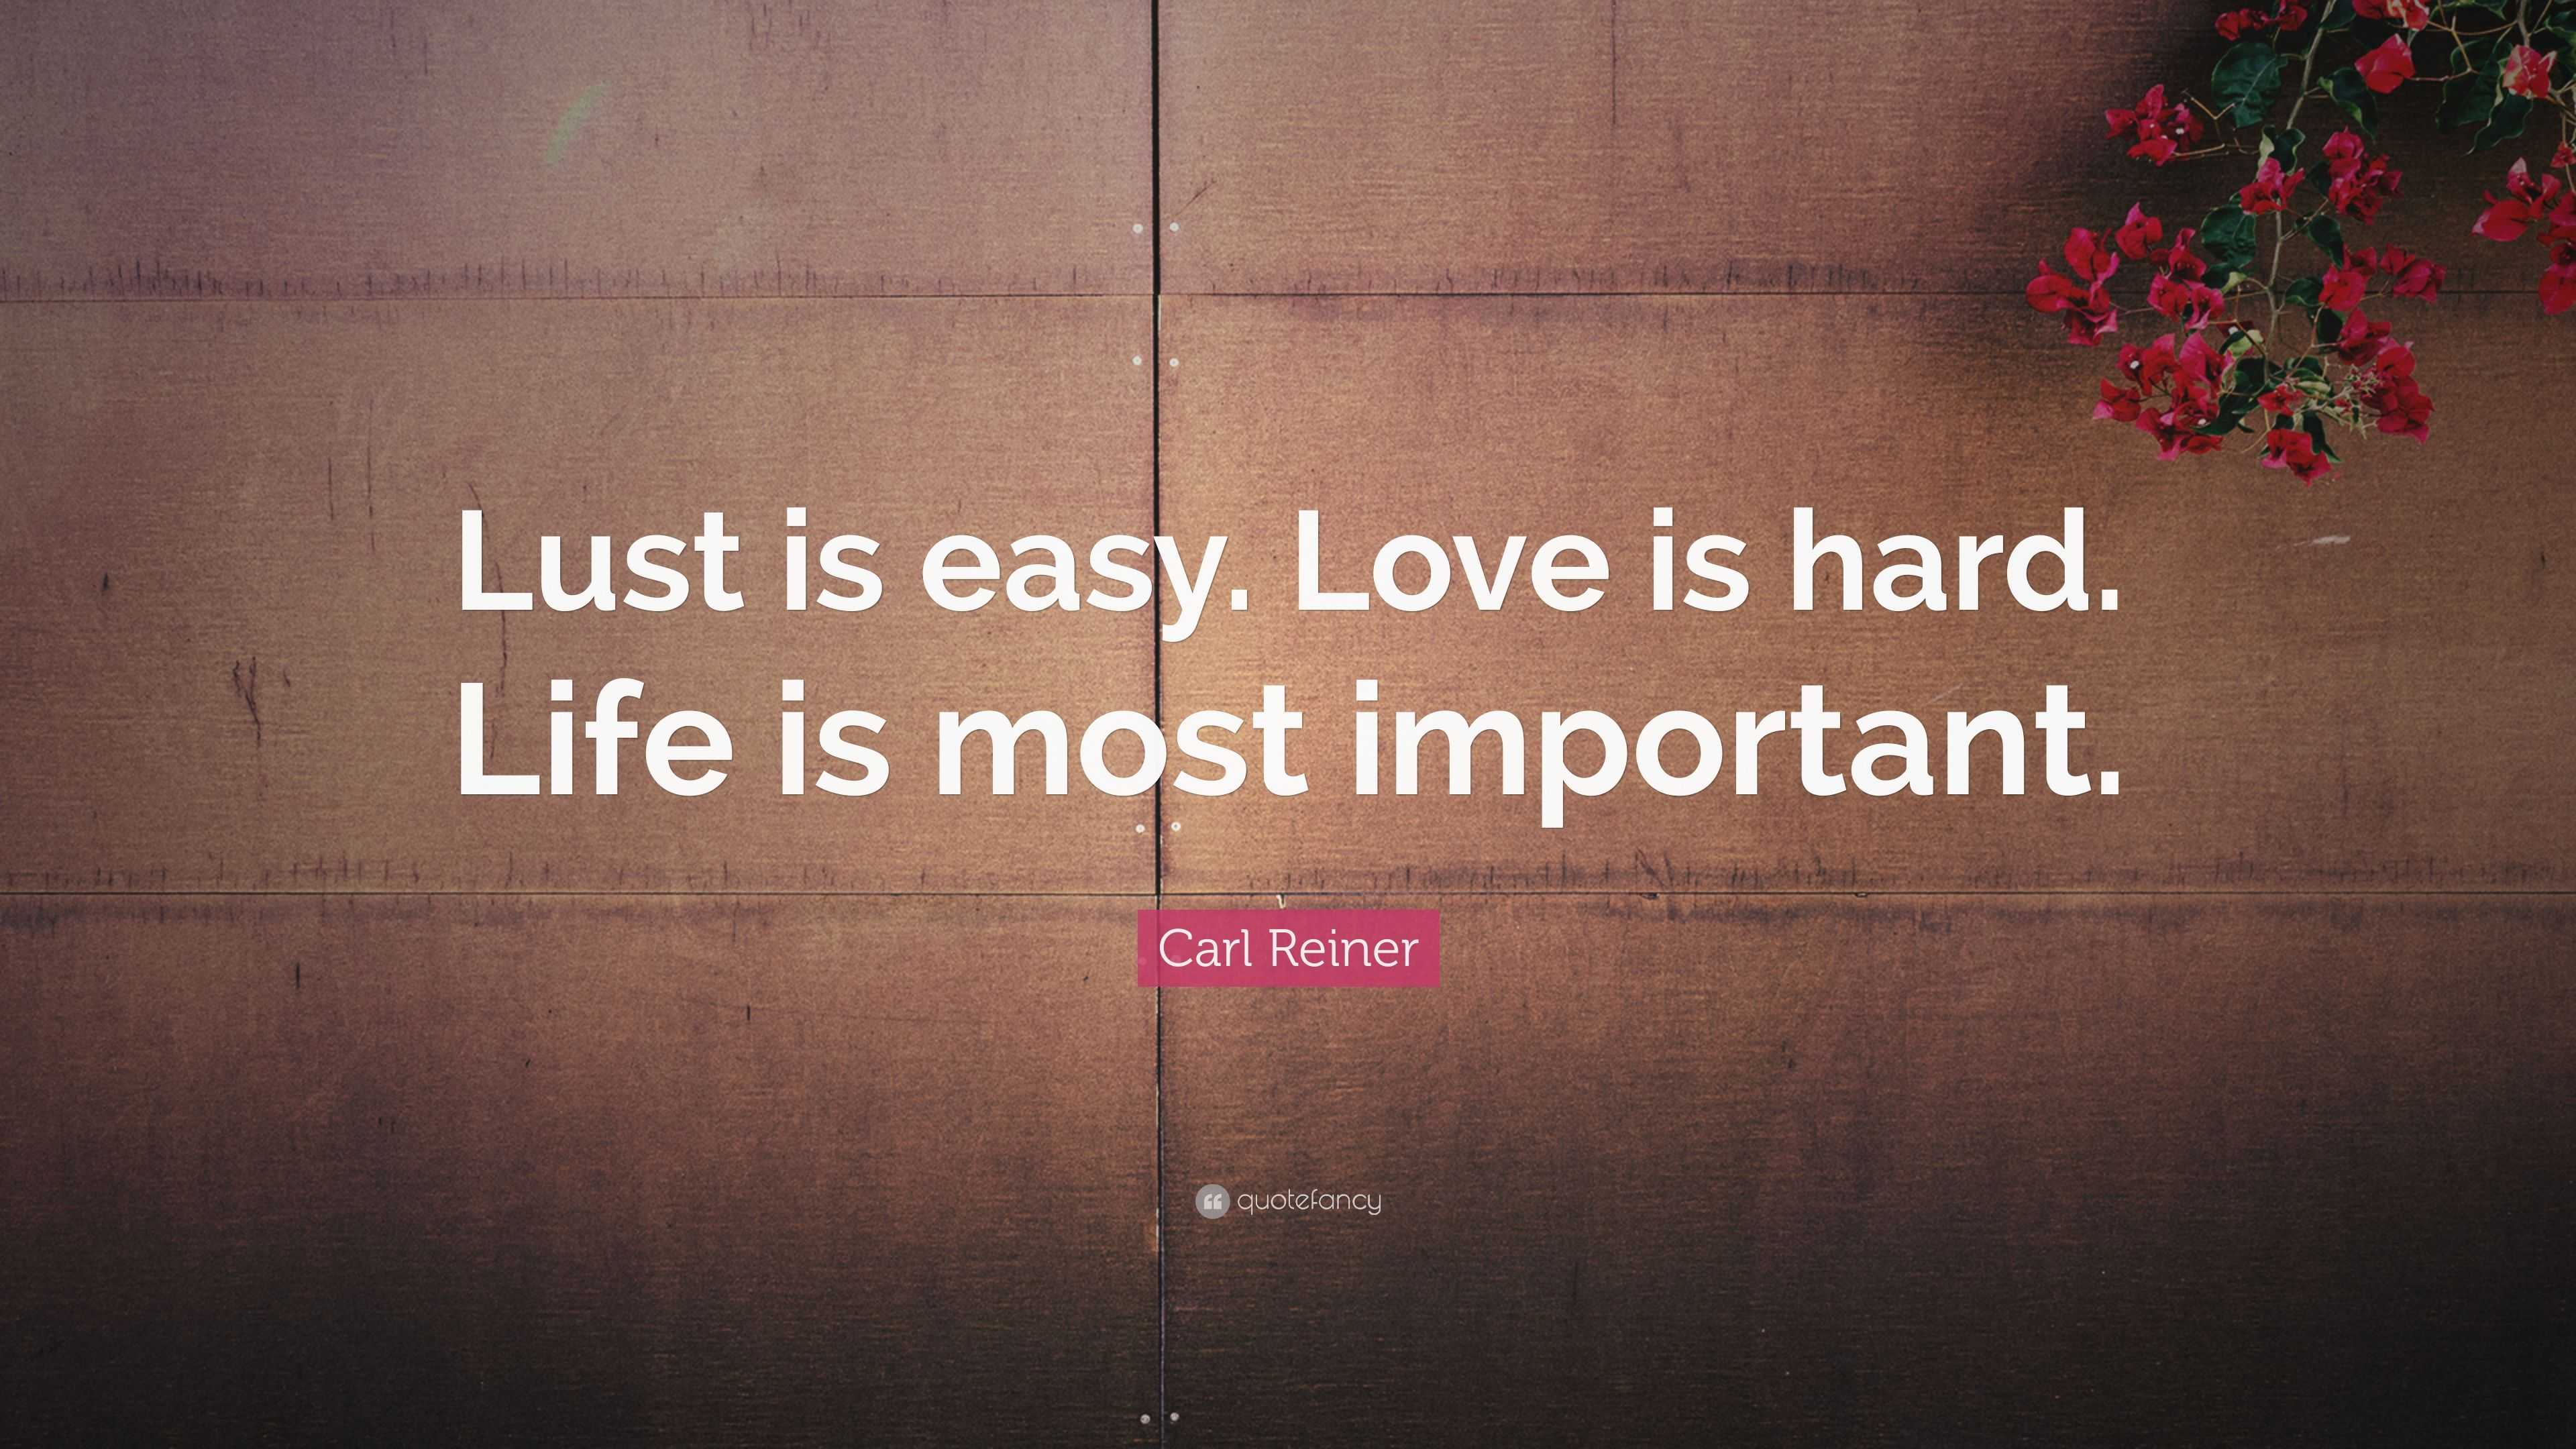 Carl Reiner Quote “Lust is easy Love is hard Life is most